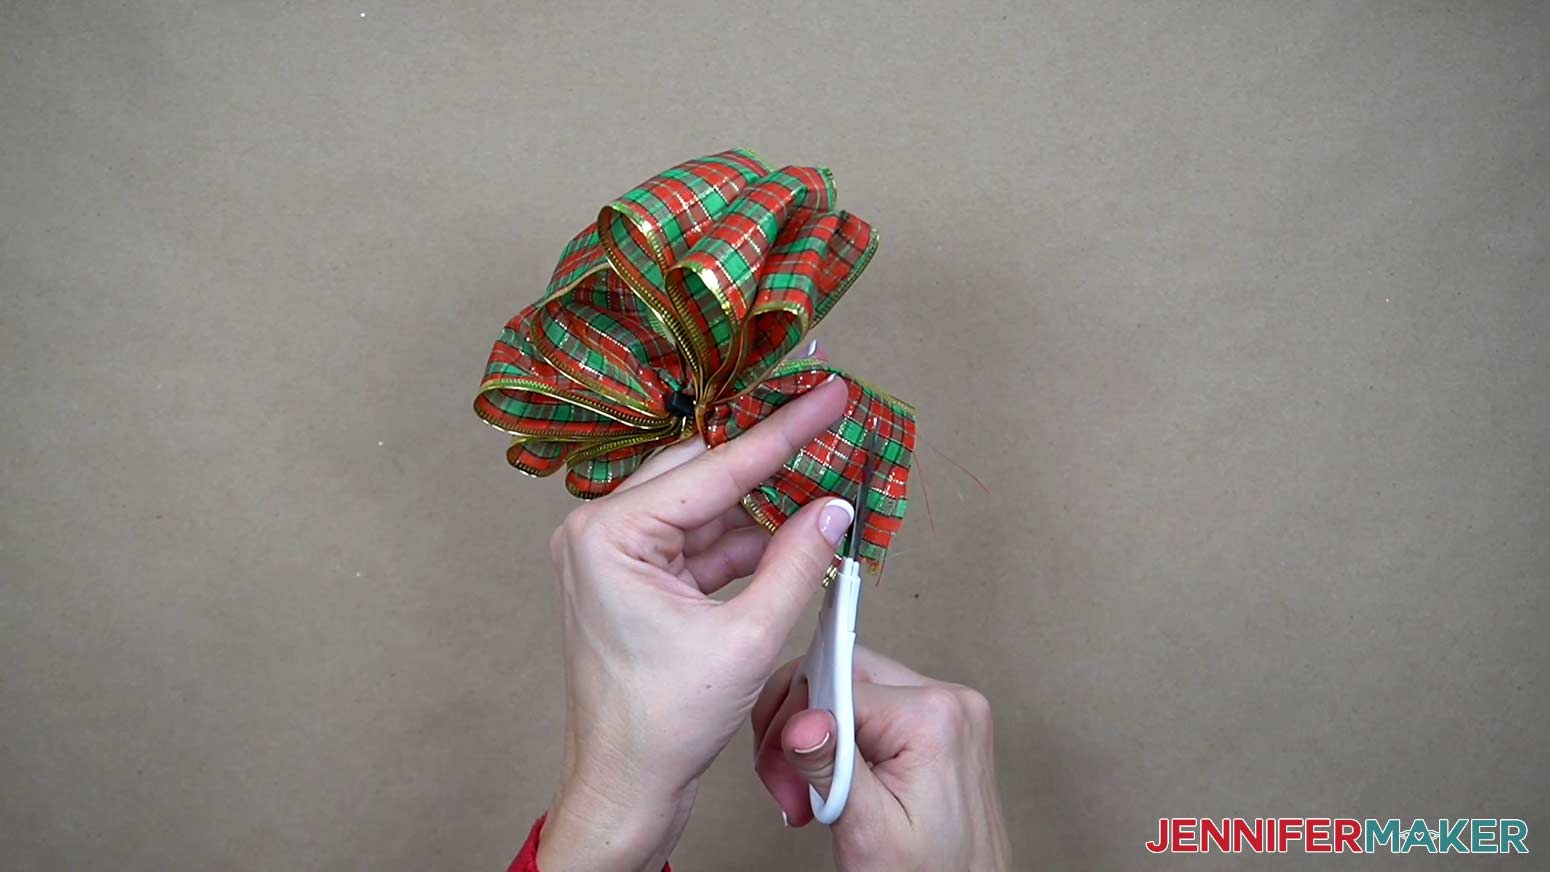 Trim the ends of the ribbons to match each other.